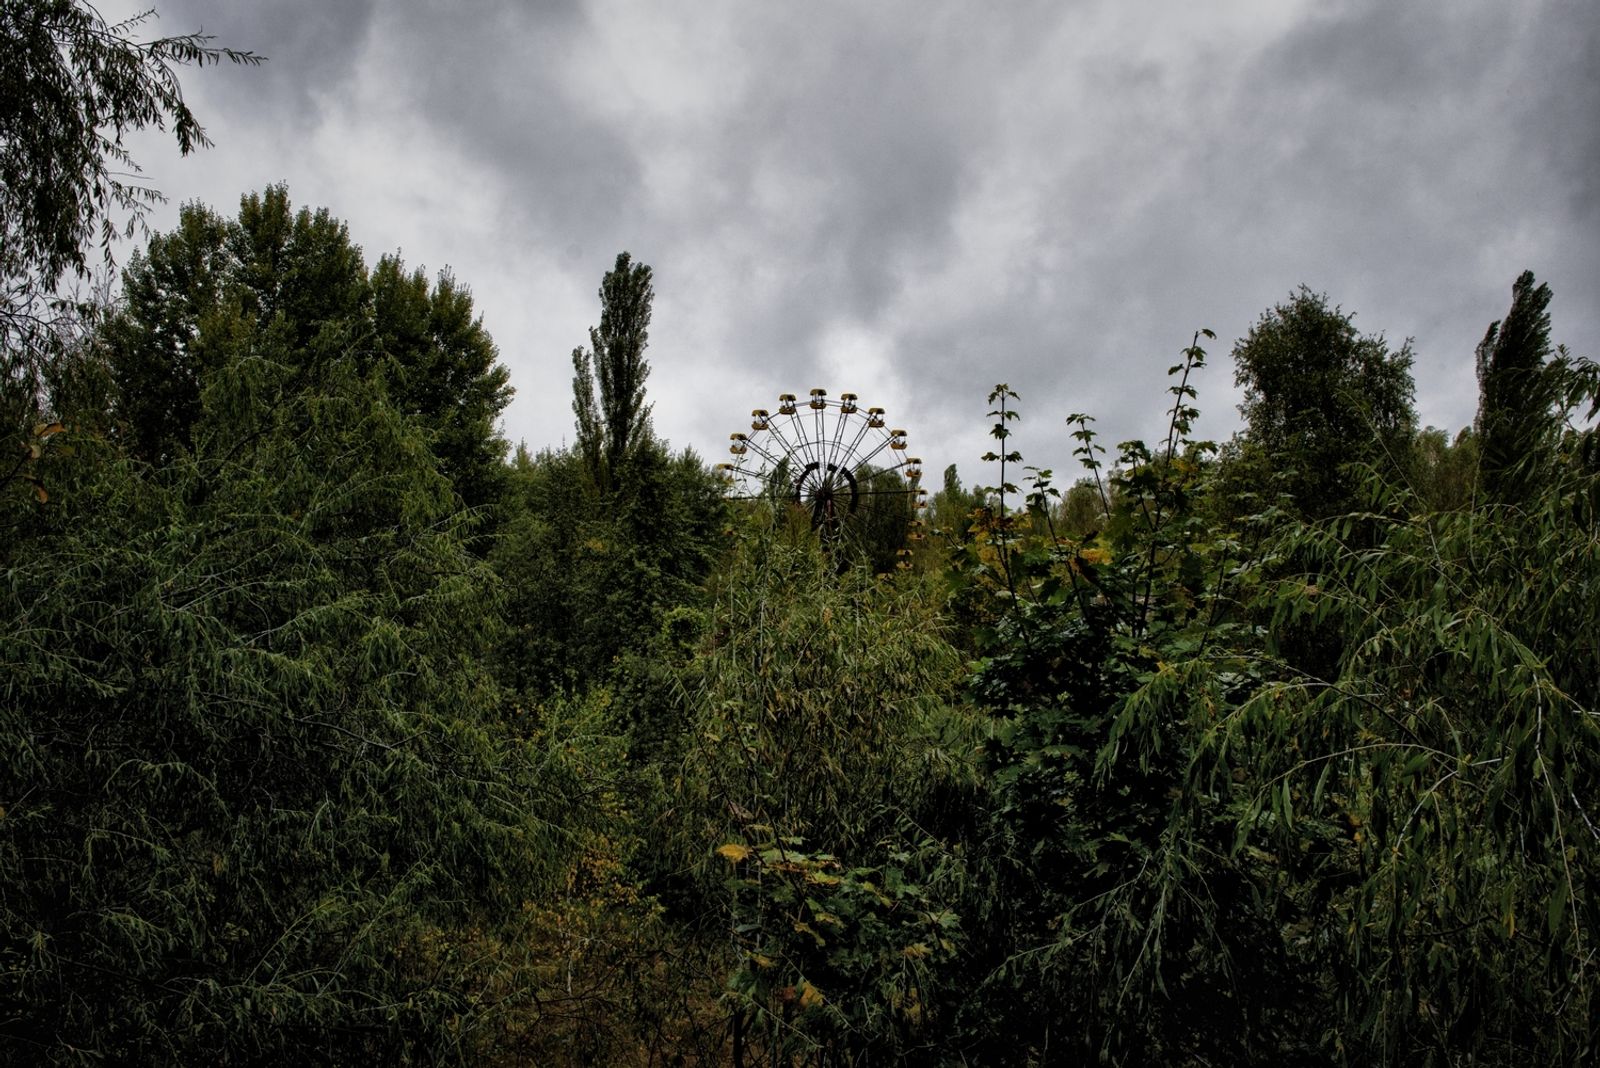 © Pierpaolo Mittica - Image from the Chernobyl 30 years after photography project